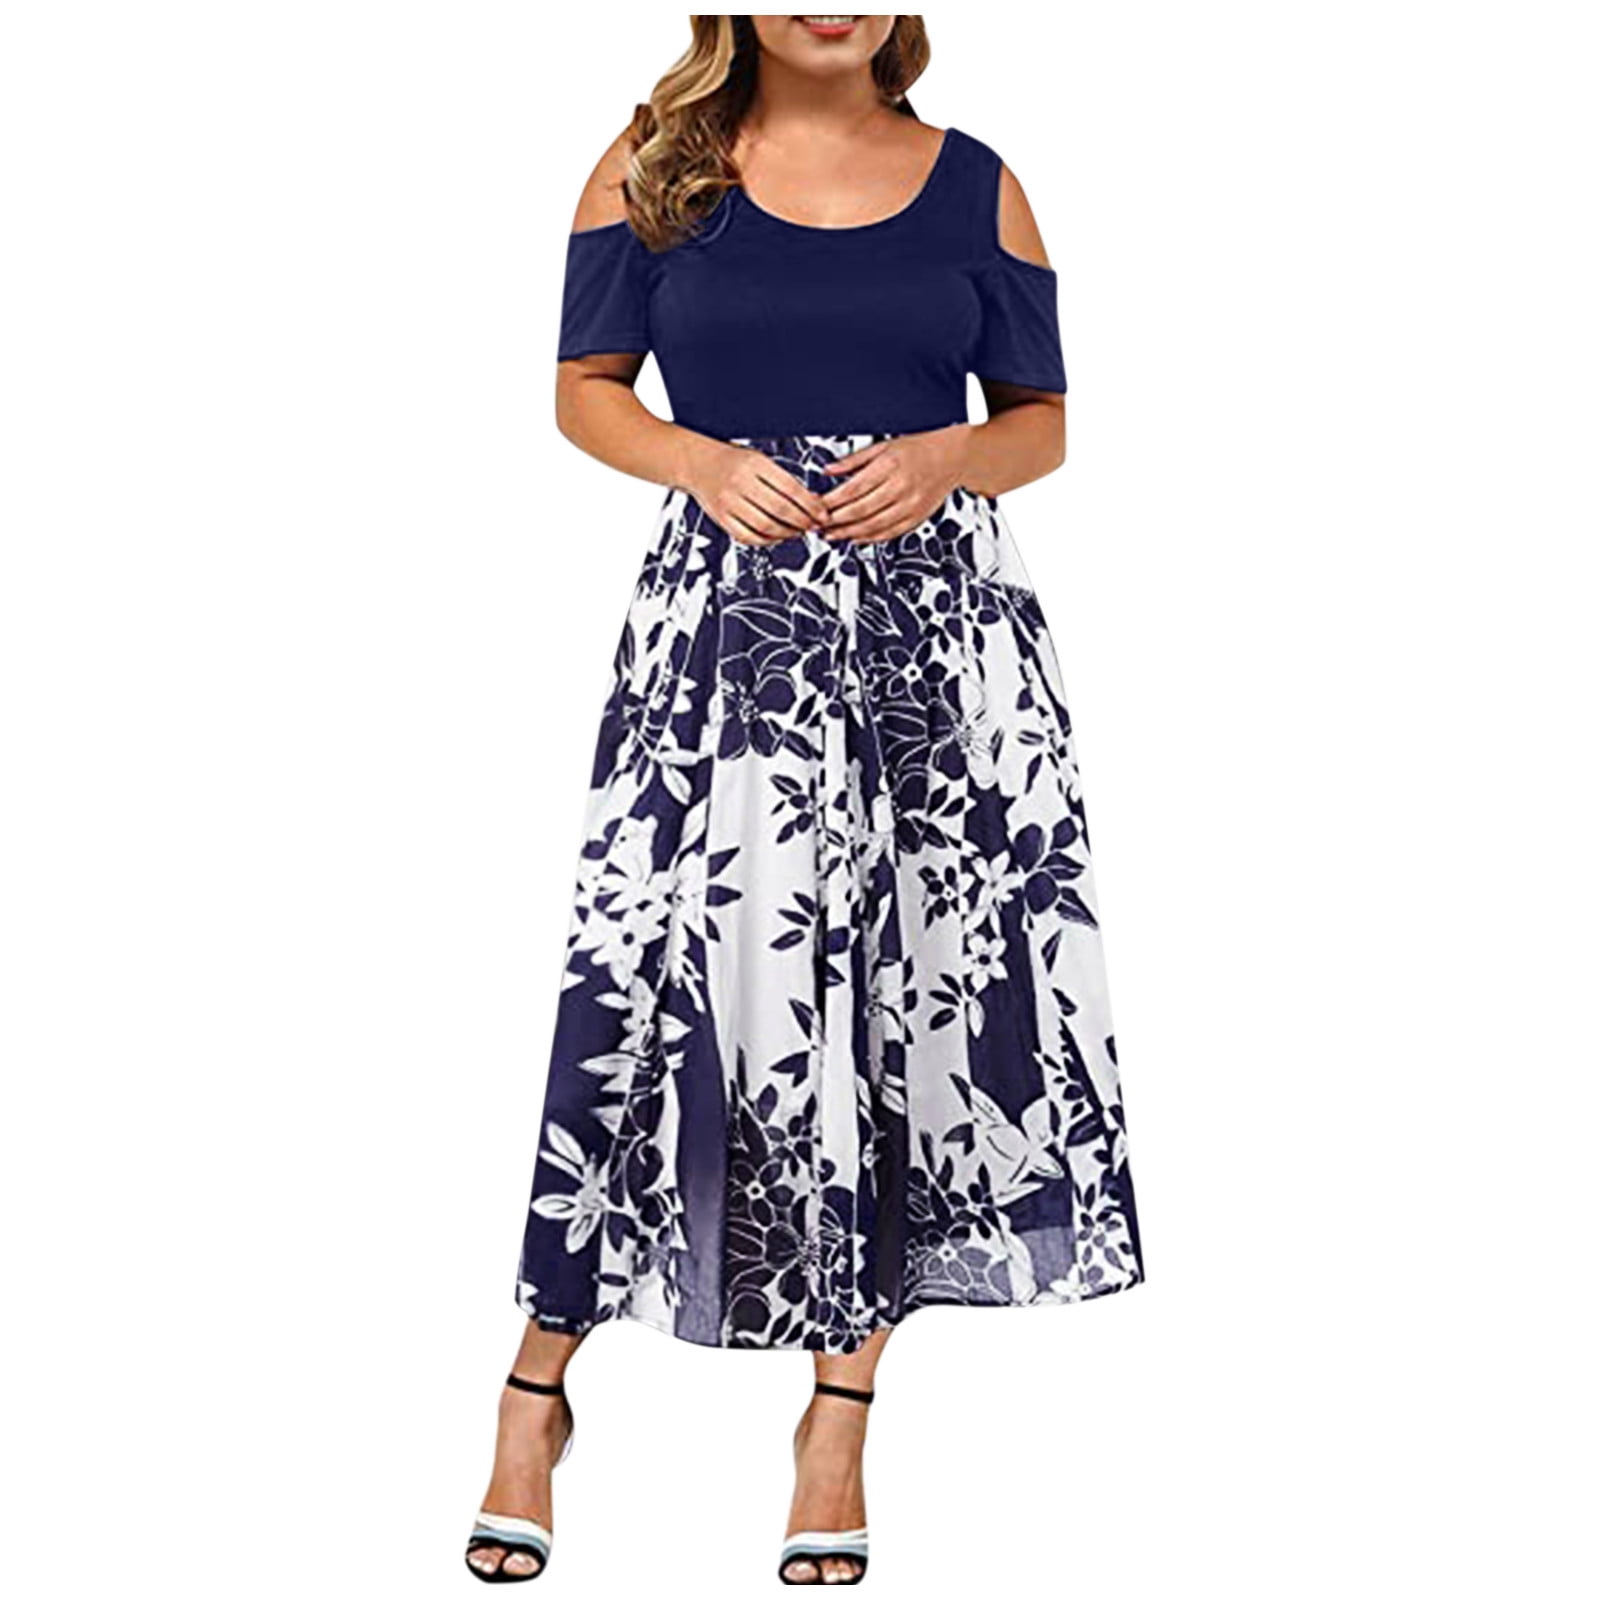 Outfmvch plus size dress for women Plus Size Casual Round Neck ...